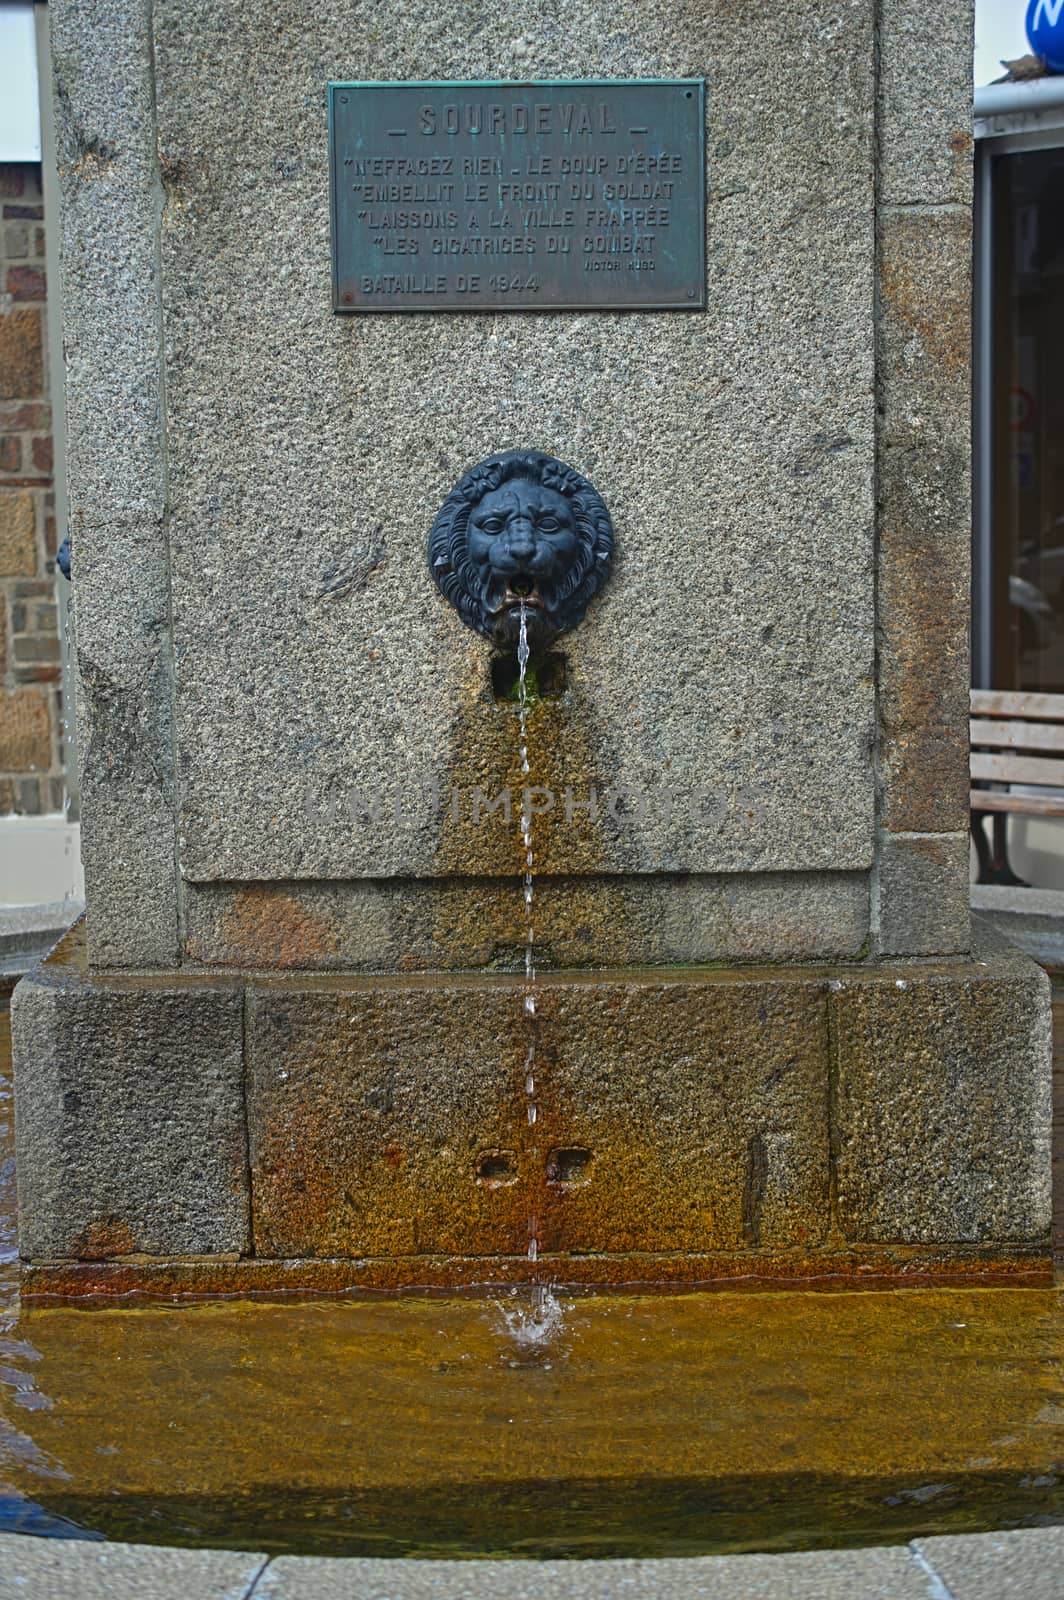 Water dripping from lions head at fountain in Surdeval Normandy France by sheriffkule